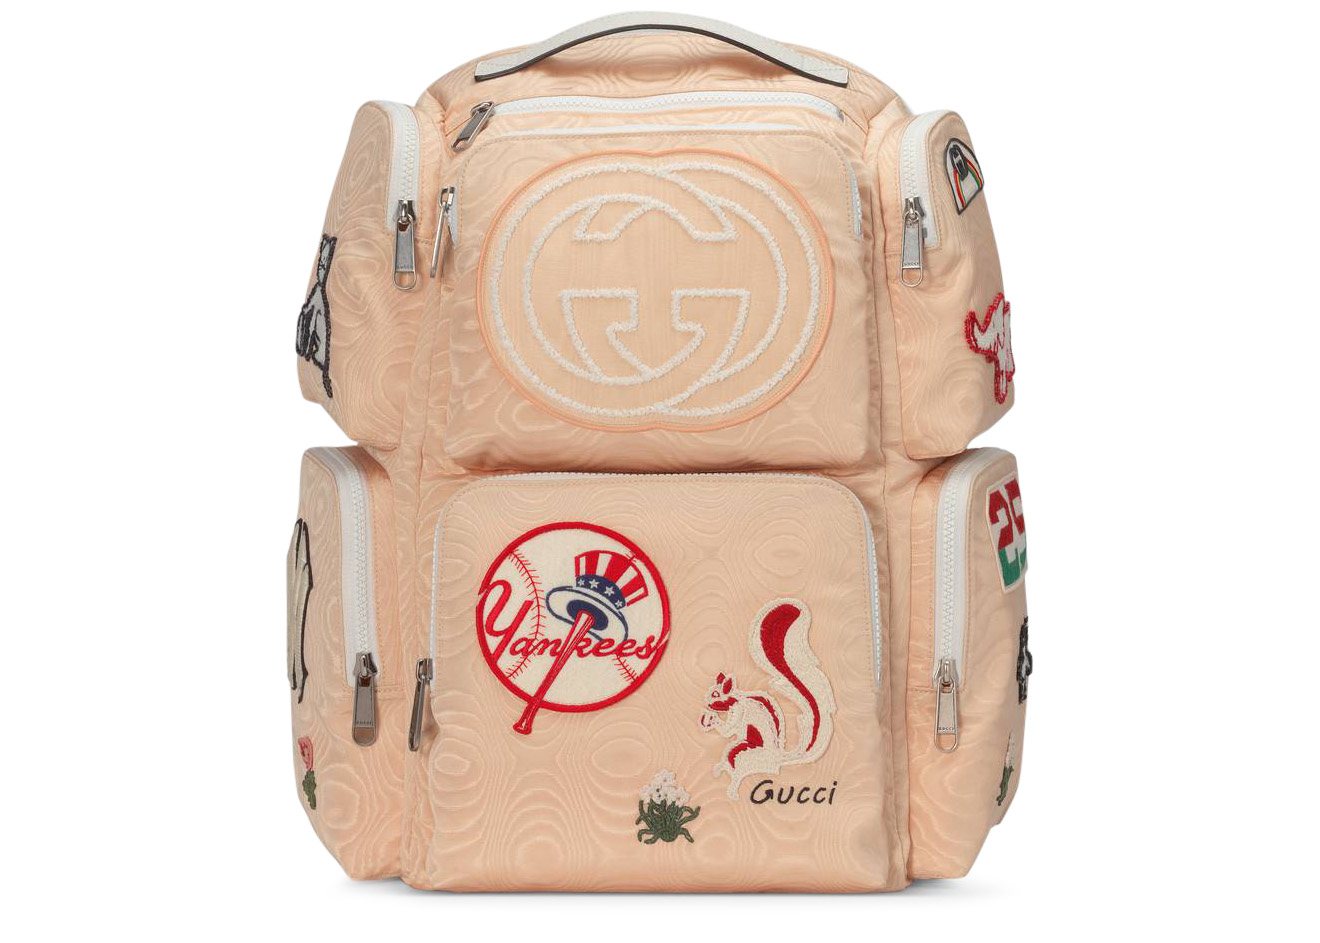 Gucci Backpack NY Yankees Patches Large 